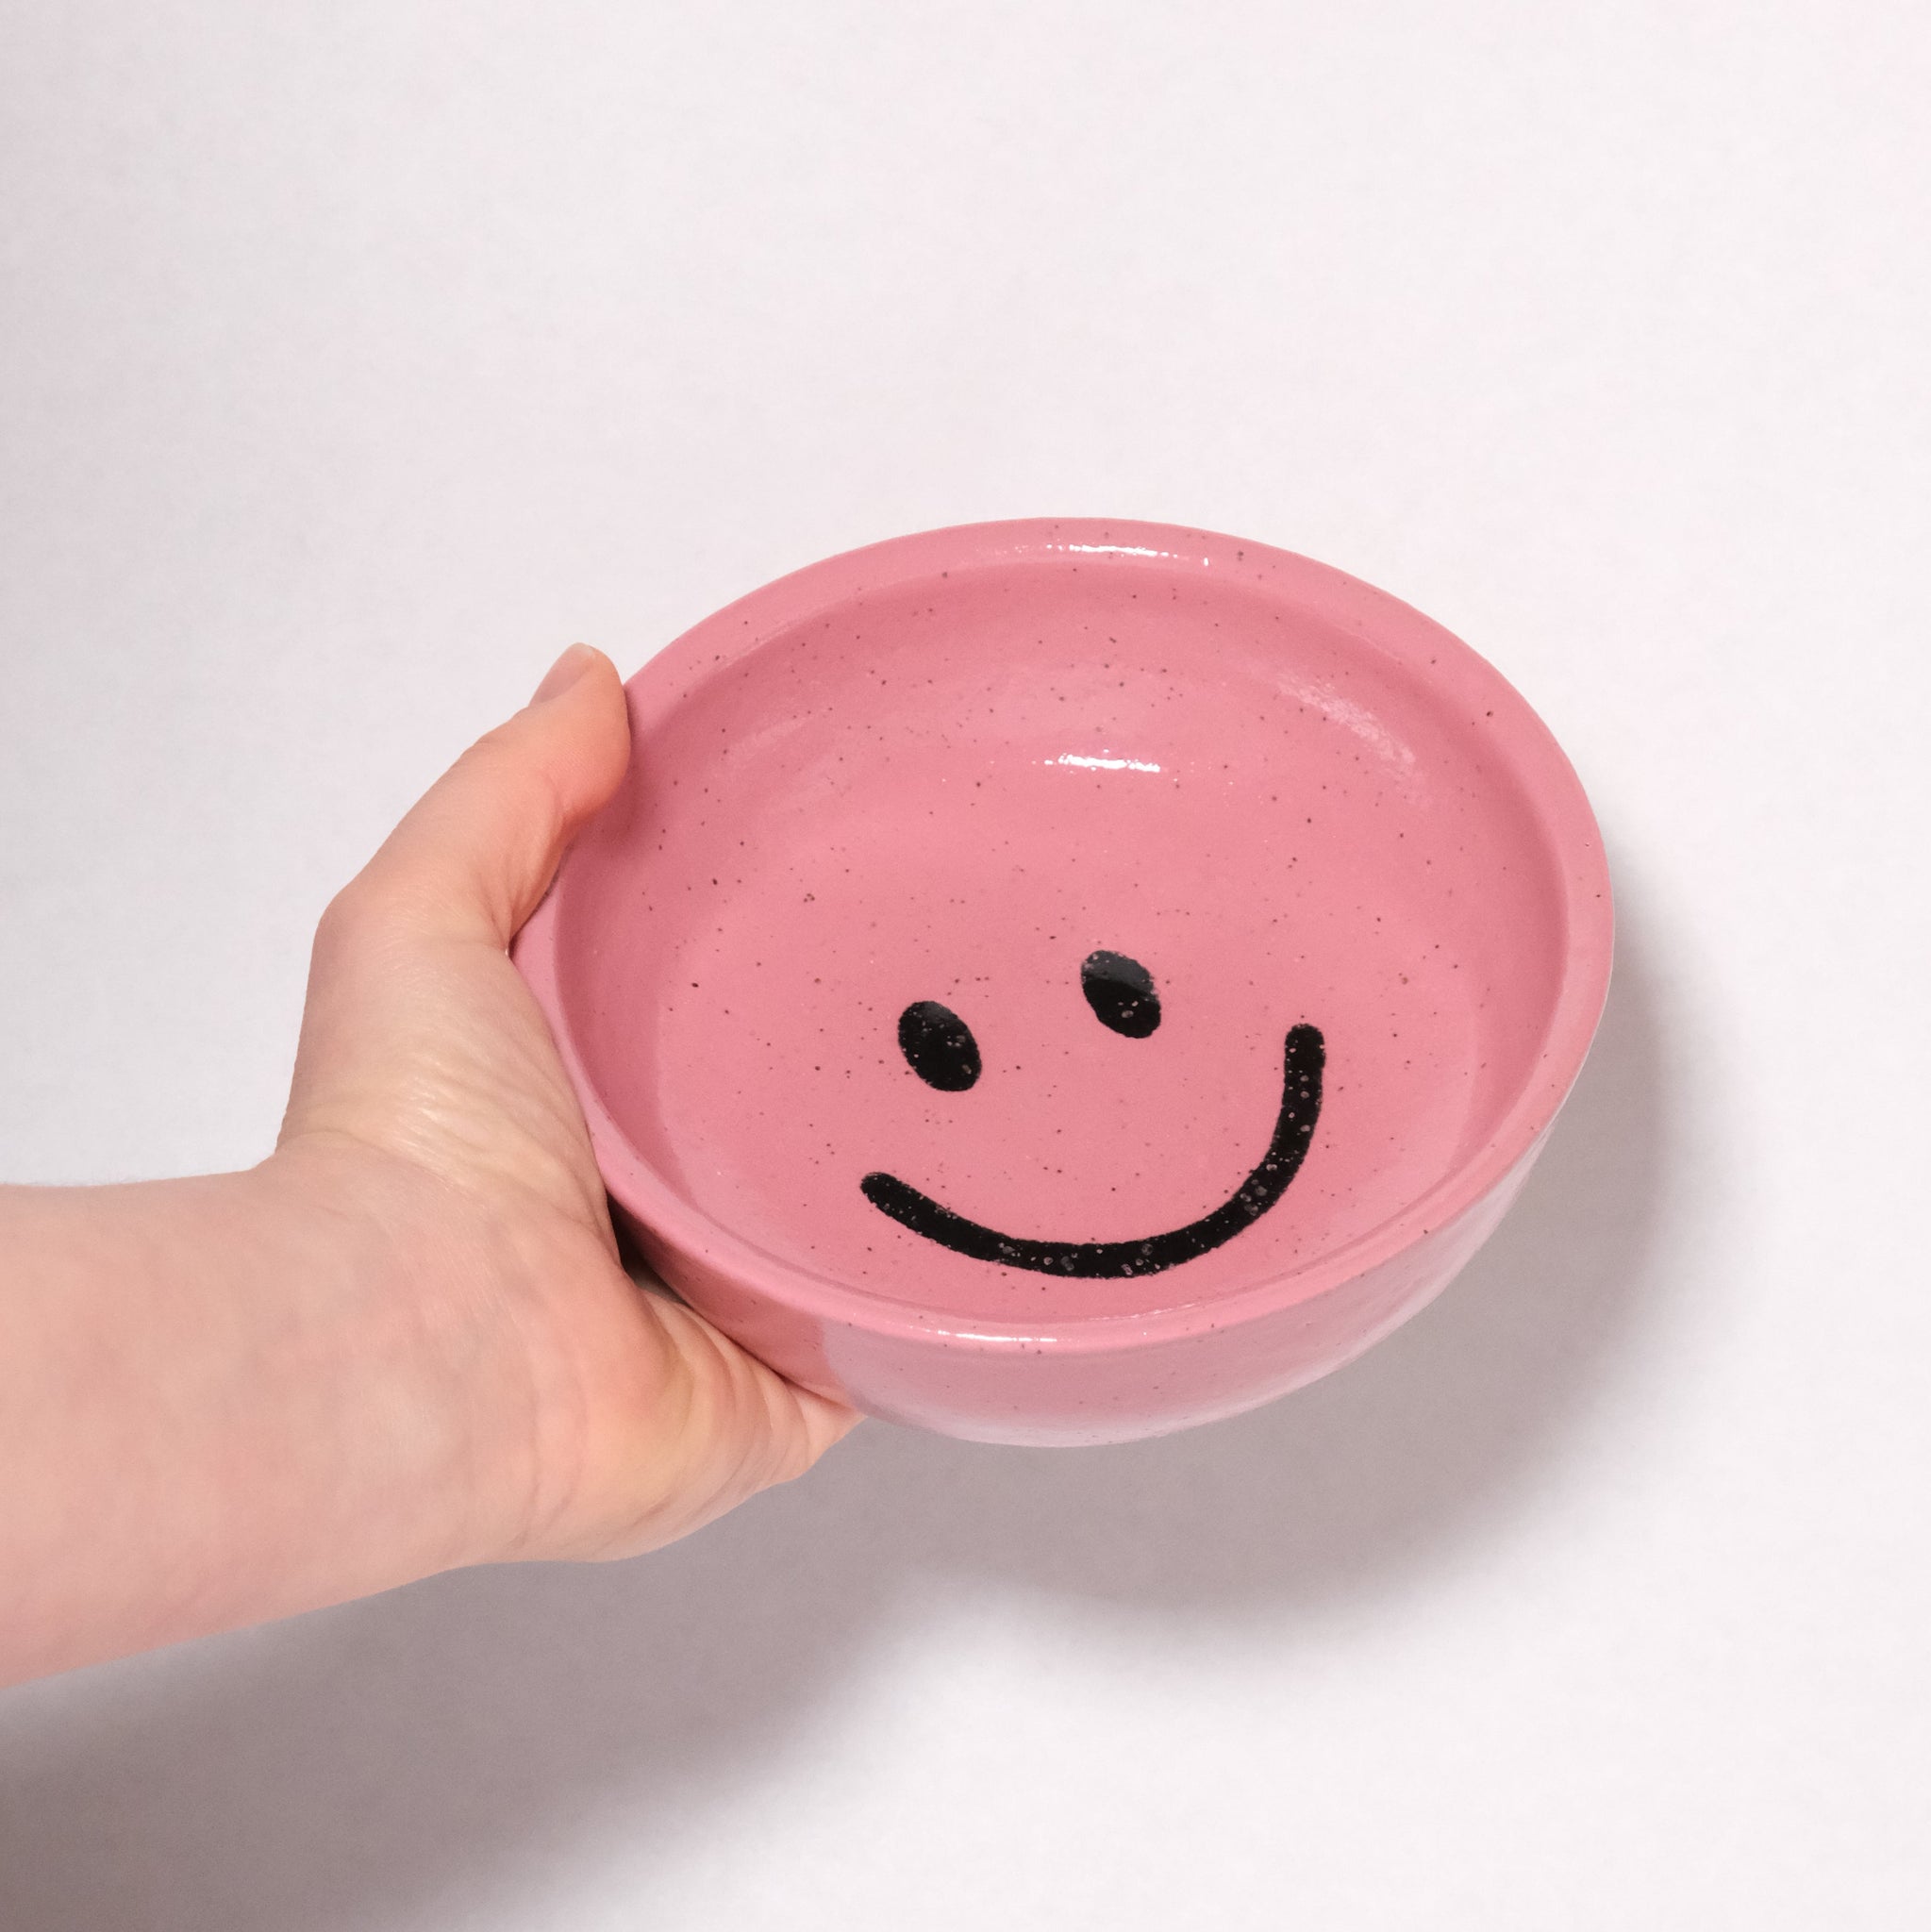 Made-To-Order Glazed Stoneware Cat Bowl with Smiley Face